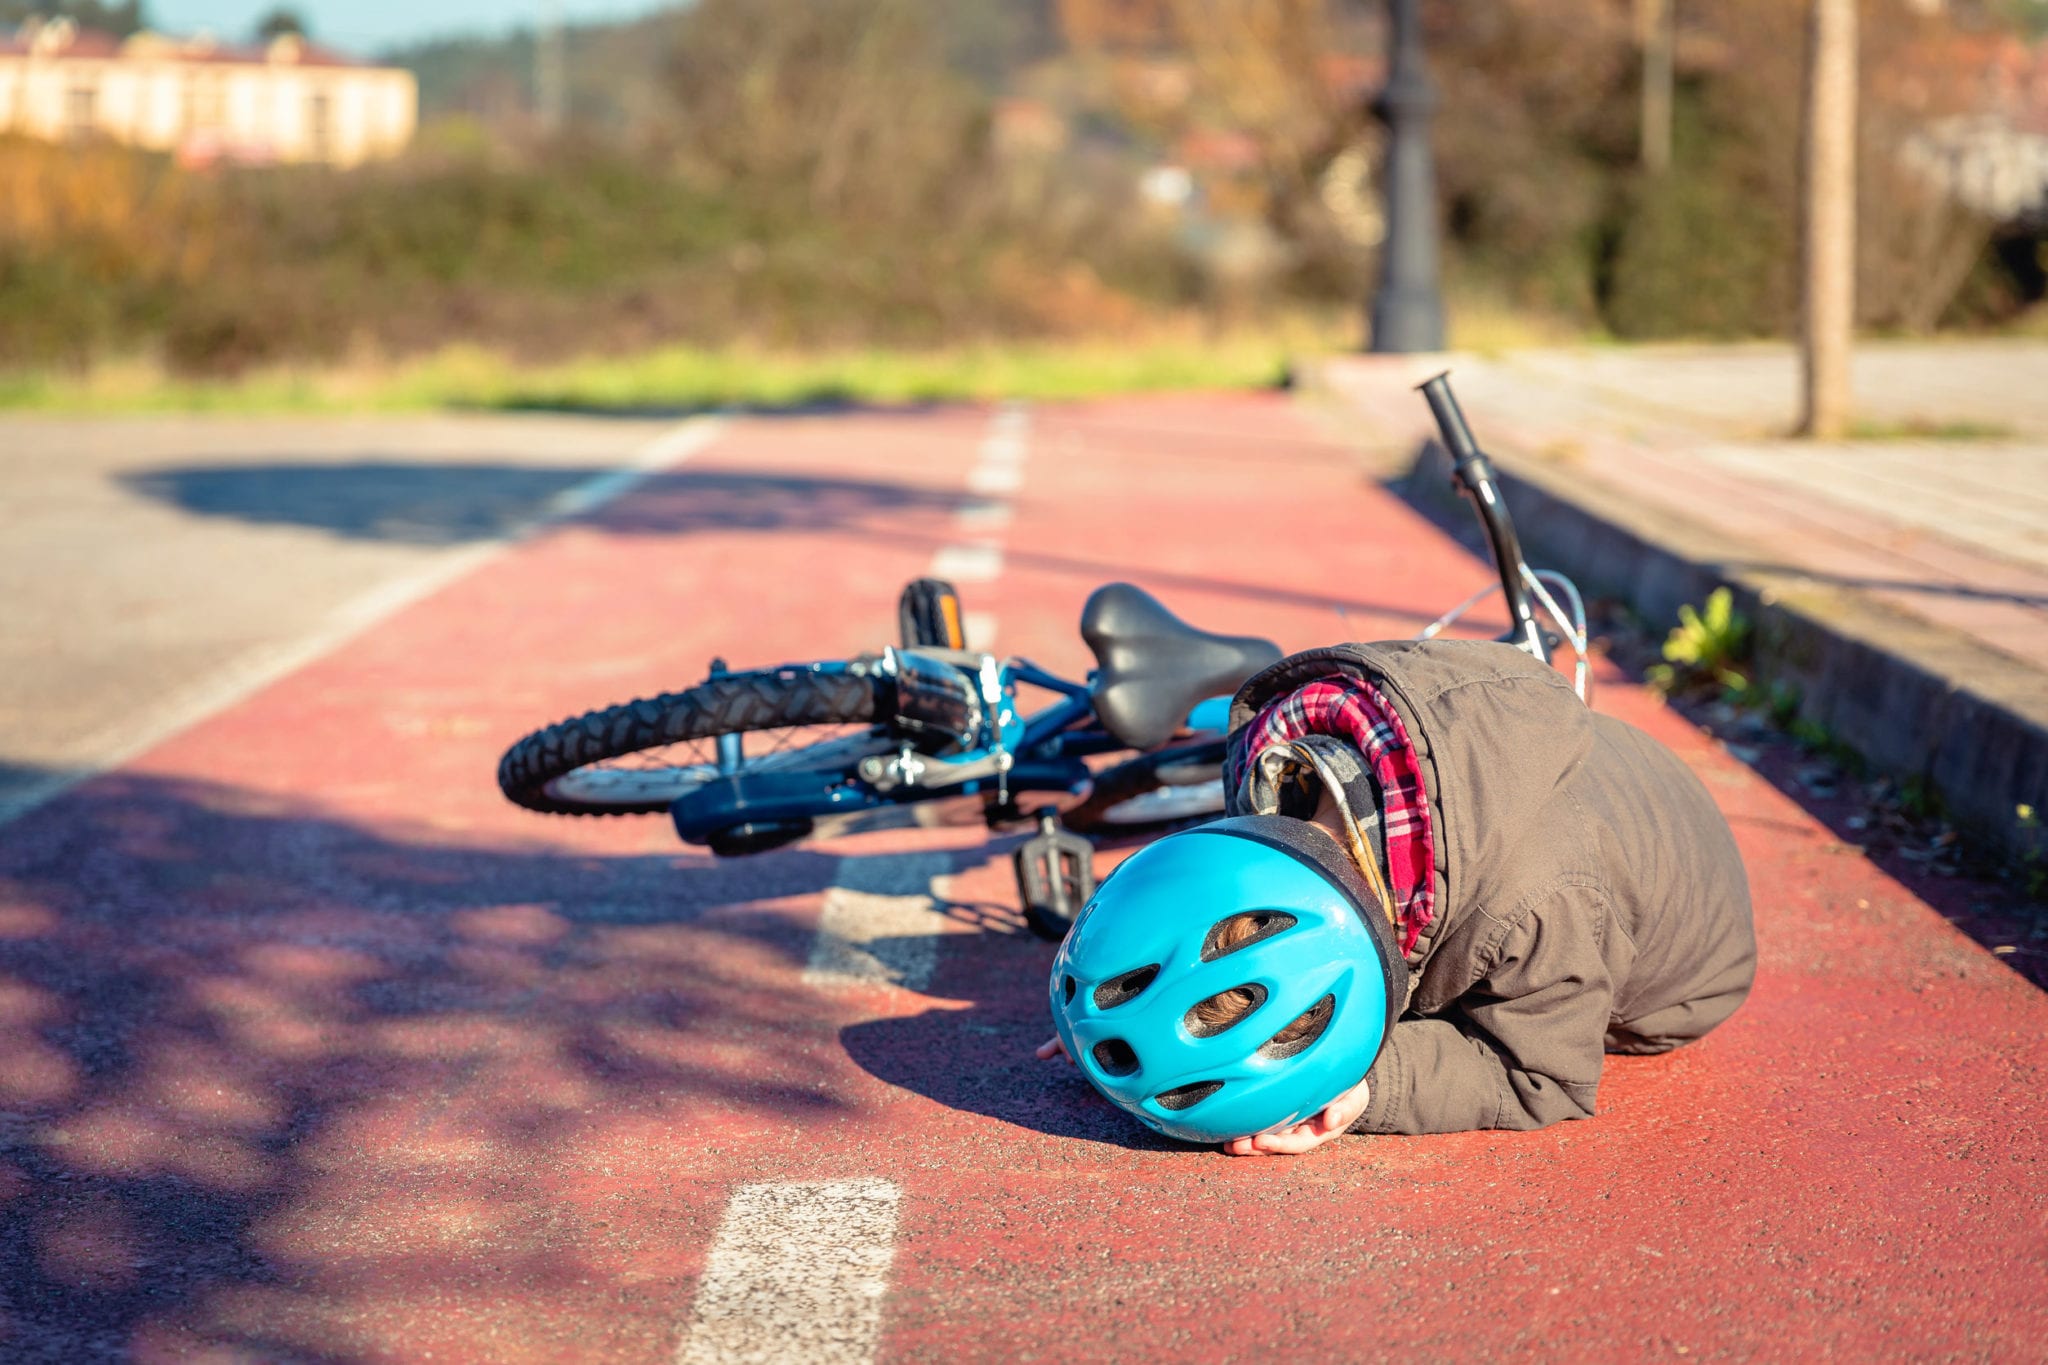 Your Kid Just Got Hurt in a Bike Accident - Next Steps for FL Parent